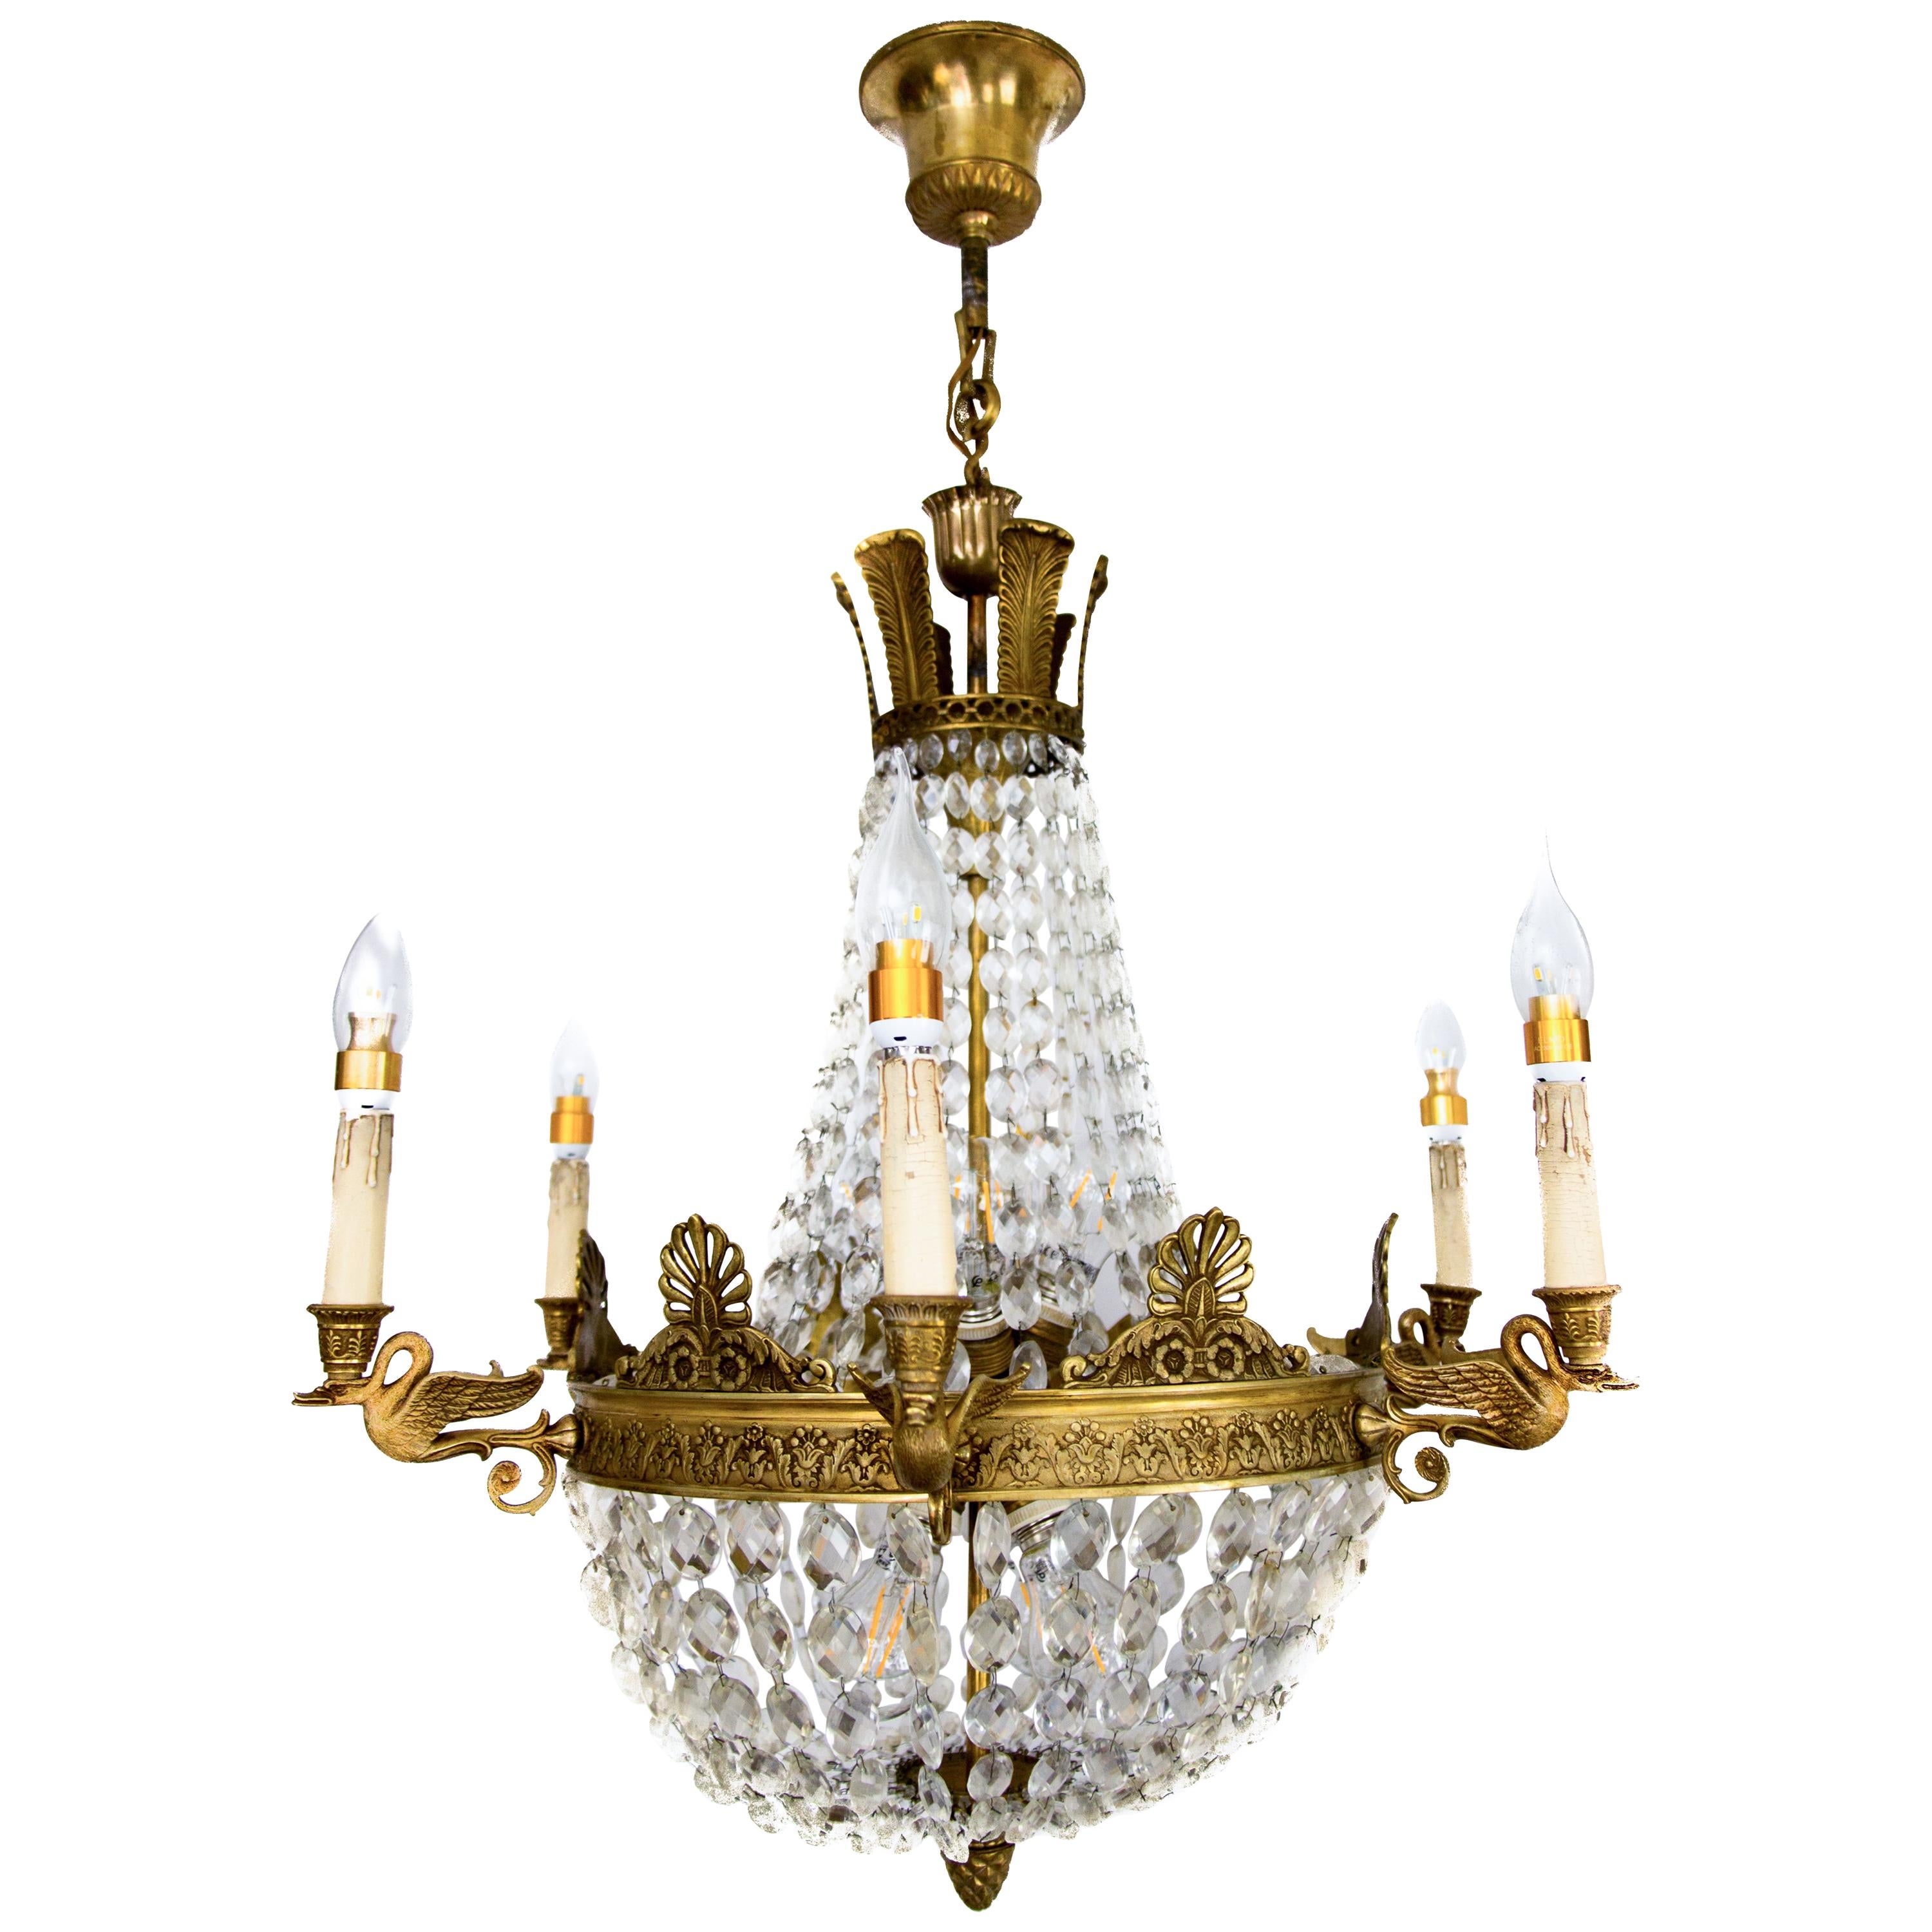 French Empire Style Fourteen-Light Crystal and Bronze Basket Chandelier